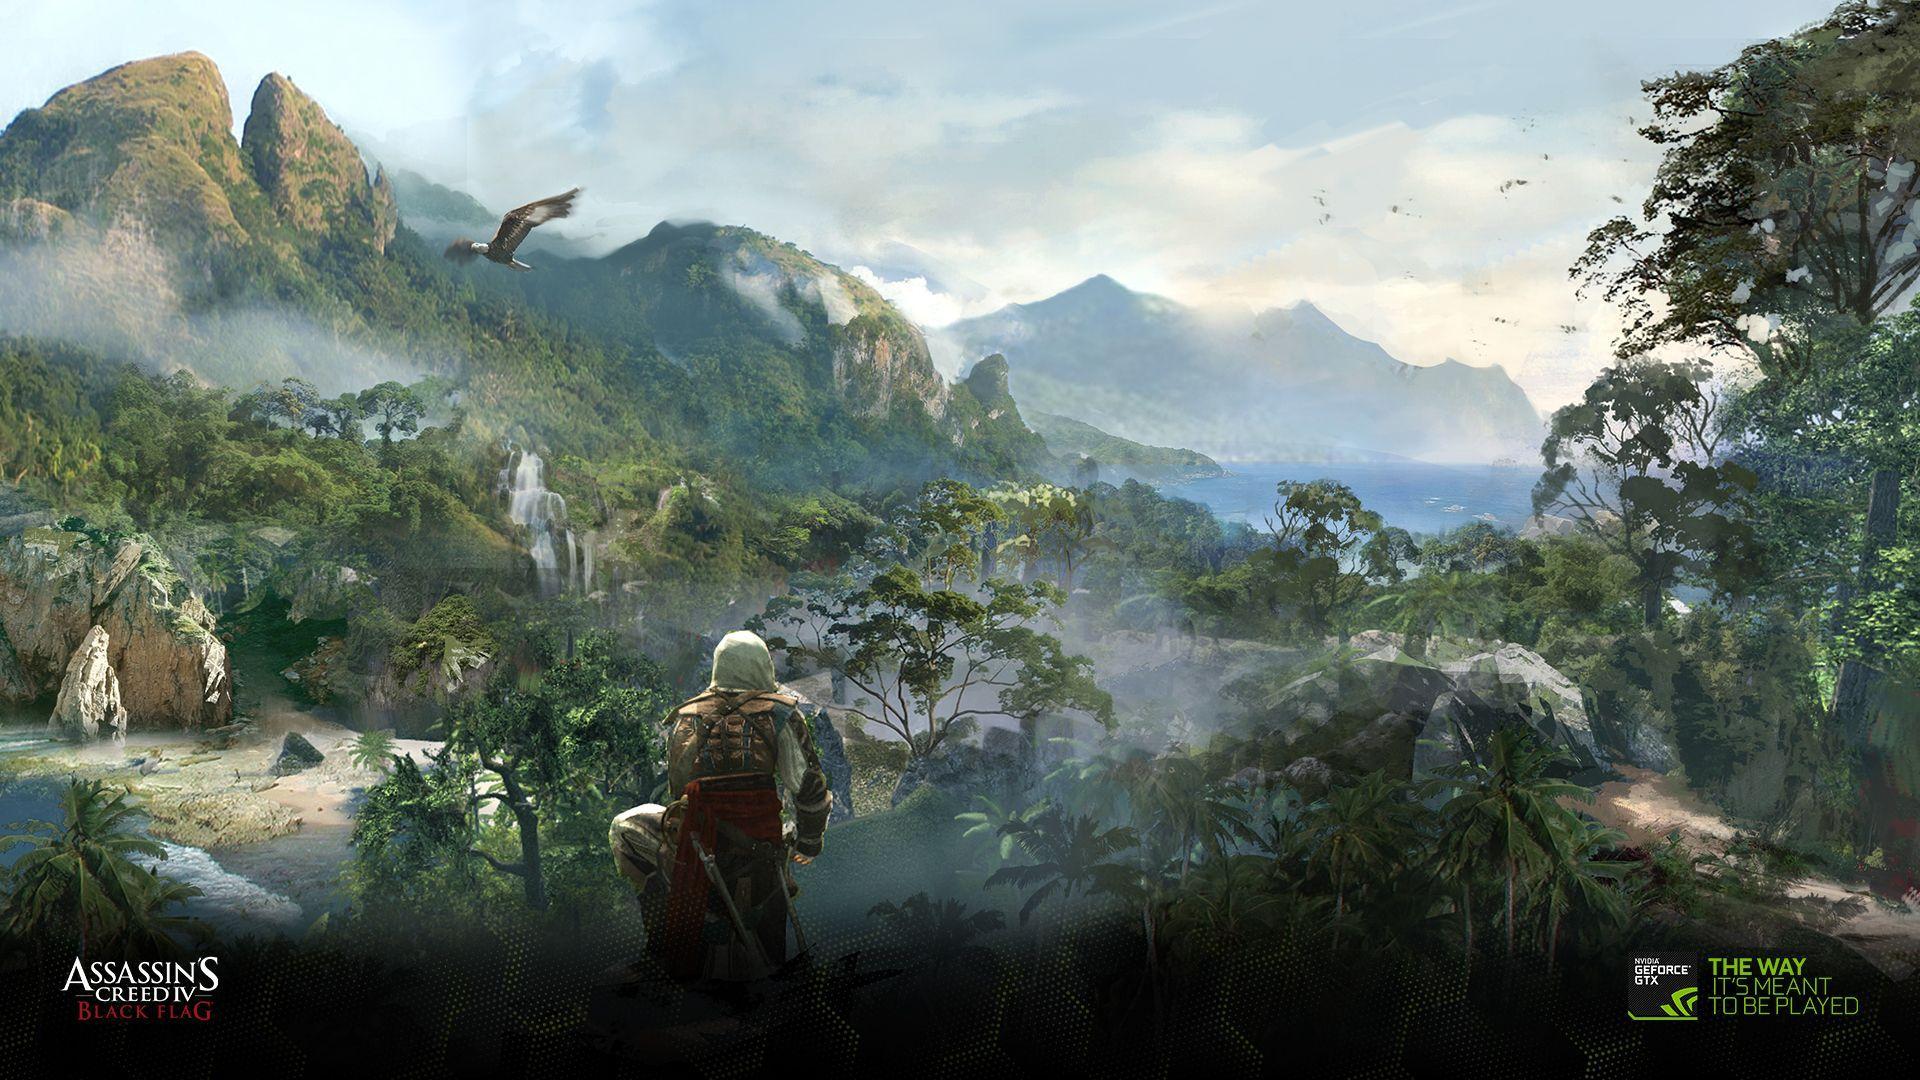 Download The Assassin's Creed IV Black Flag Wallpaper